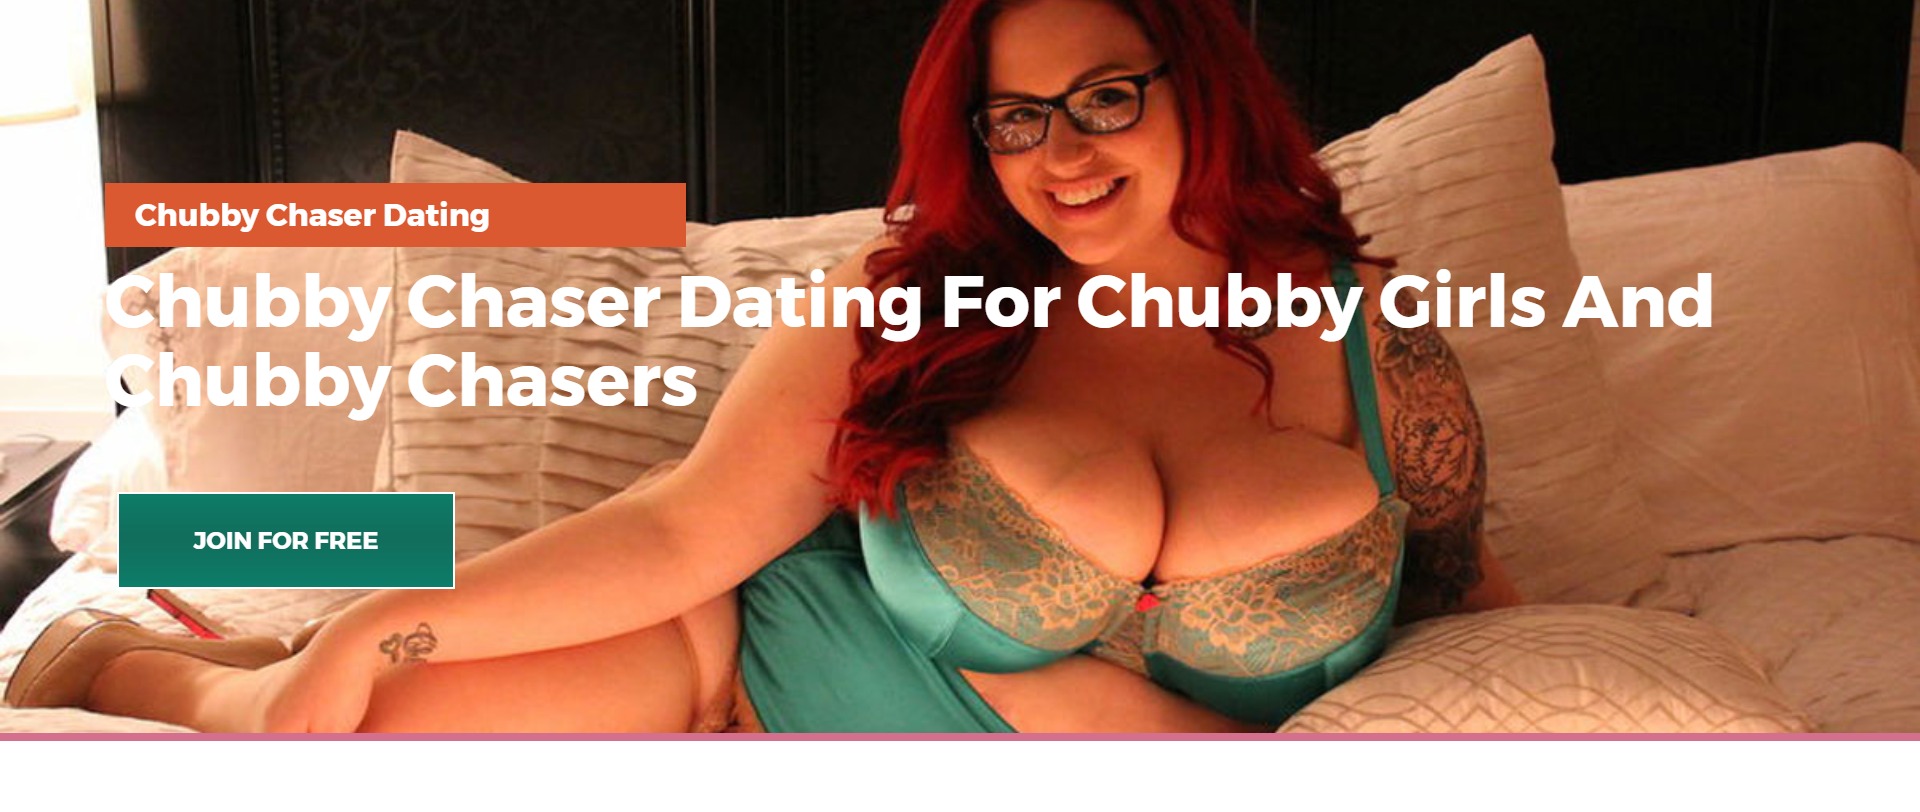 personals Chubby chasers